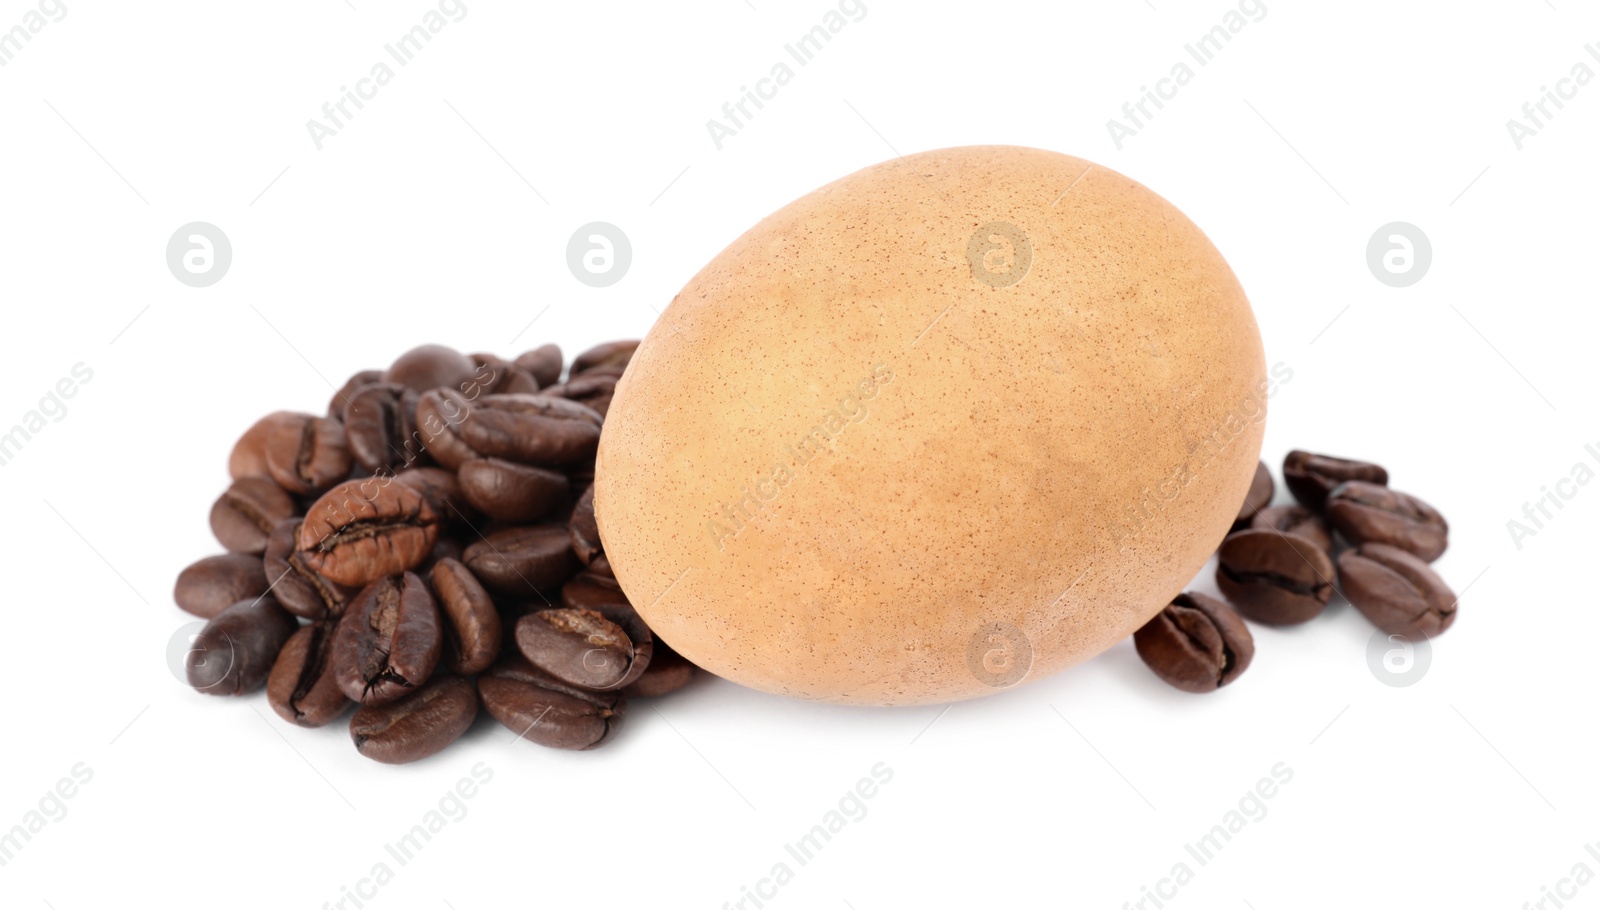 Photo of Easter egg painted with natural dye and coffee beans on white background